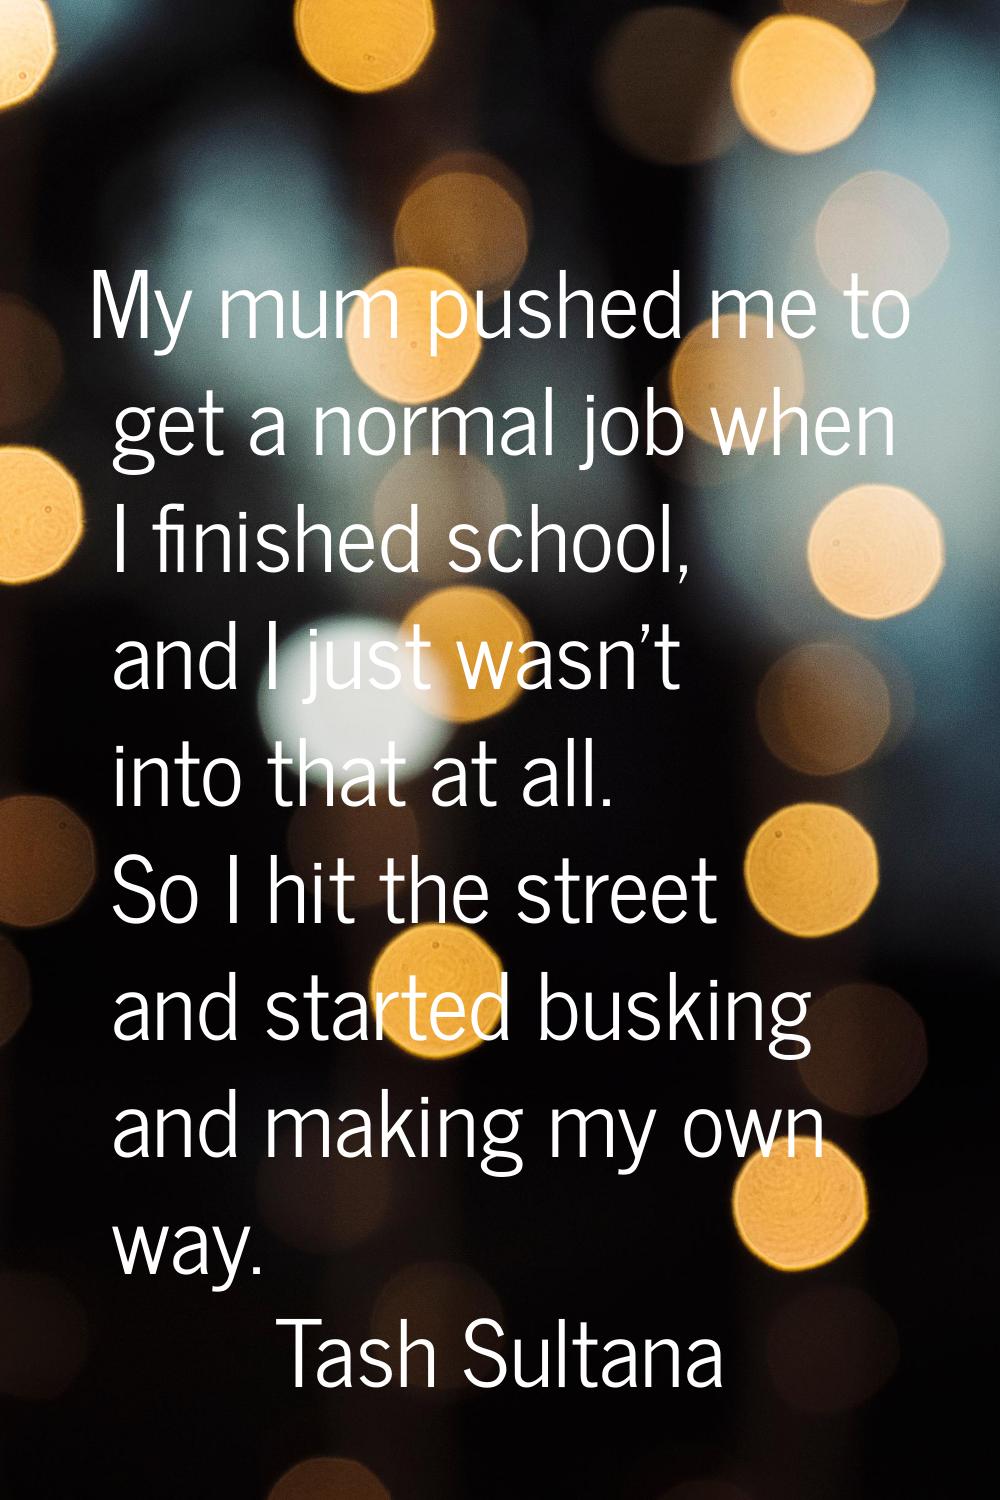 My mum pushed me to get a normal job when I finished school, and I just wasn't into that at all. So